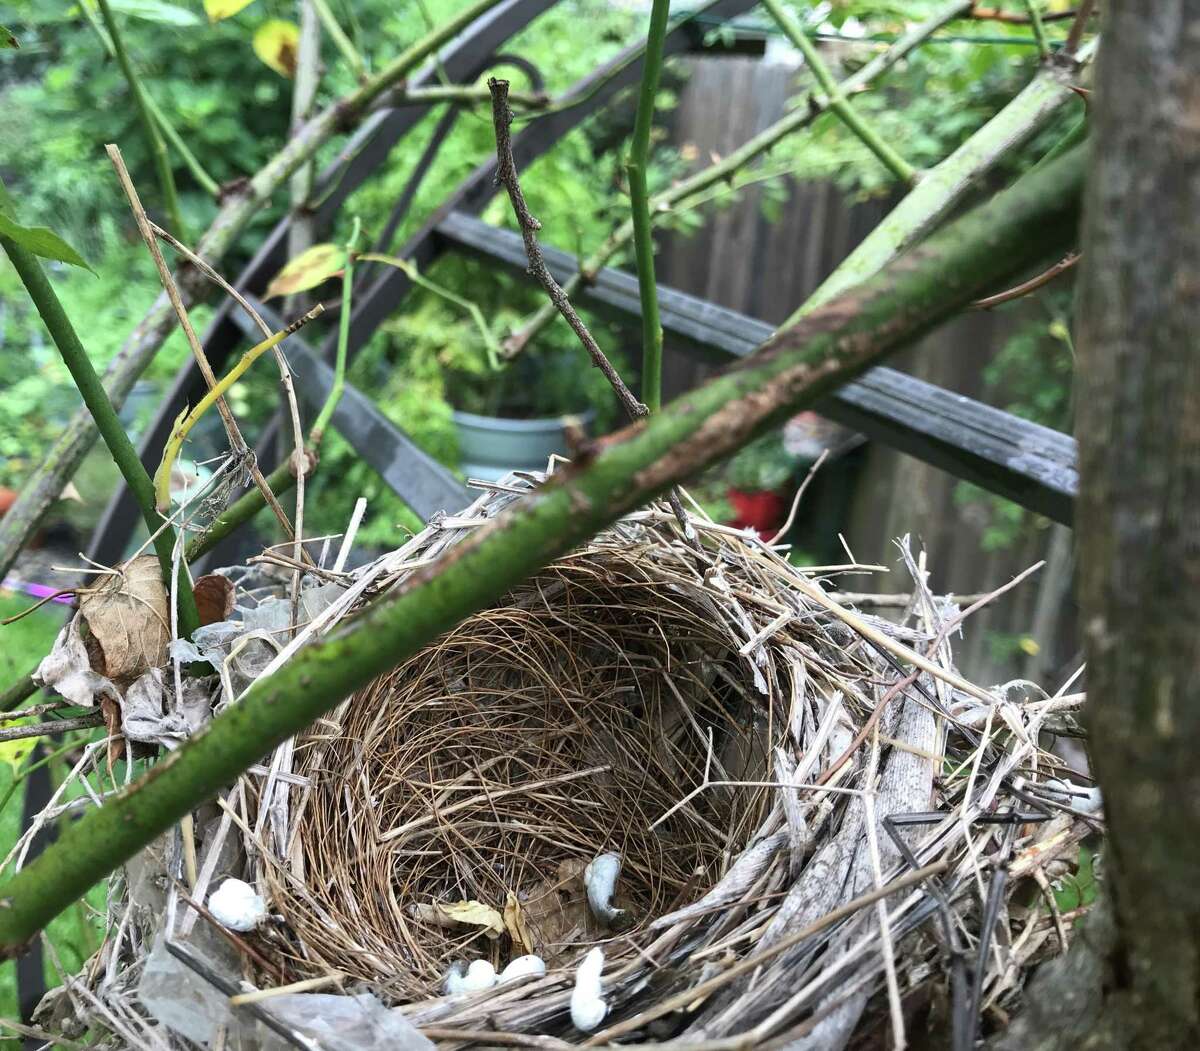 A cardinal nest left in a rose trellis after its young occupants have fledged on June 20, 2020, still contains a few egg fragments.